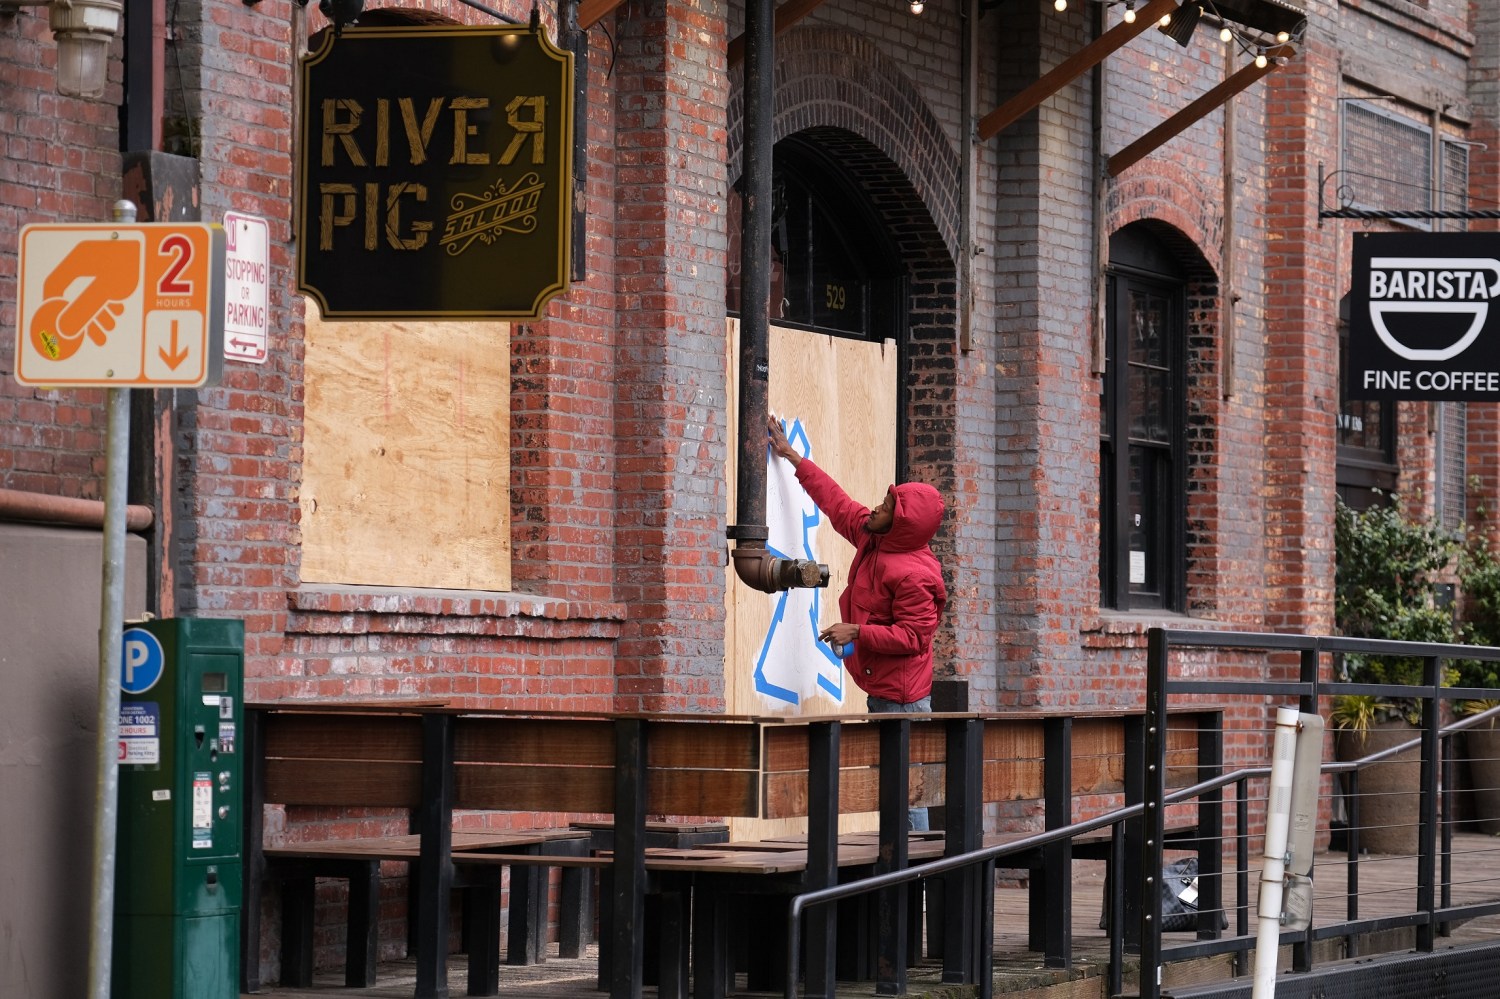 An artist works on a boarded up River Pig Saloon in Portland, Ore., on March 24, 2020. Yesterday Governor Kate Brown issued a statewide executive order to stay home except for essential needs as more extreme social distancing measures aim to slow the spread of the novel coronavirus (COVID-19) and flatten the curve. (Photo by Alex Milan Tracy/Sipa USA)No Use UK. No Use Germany.